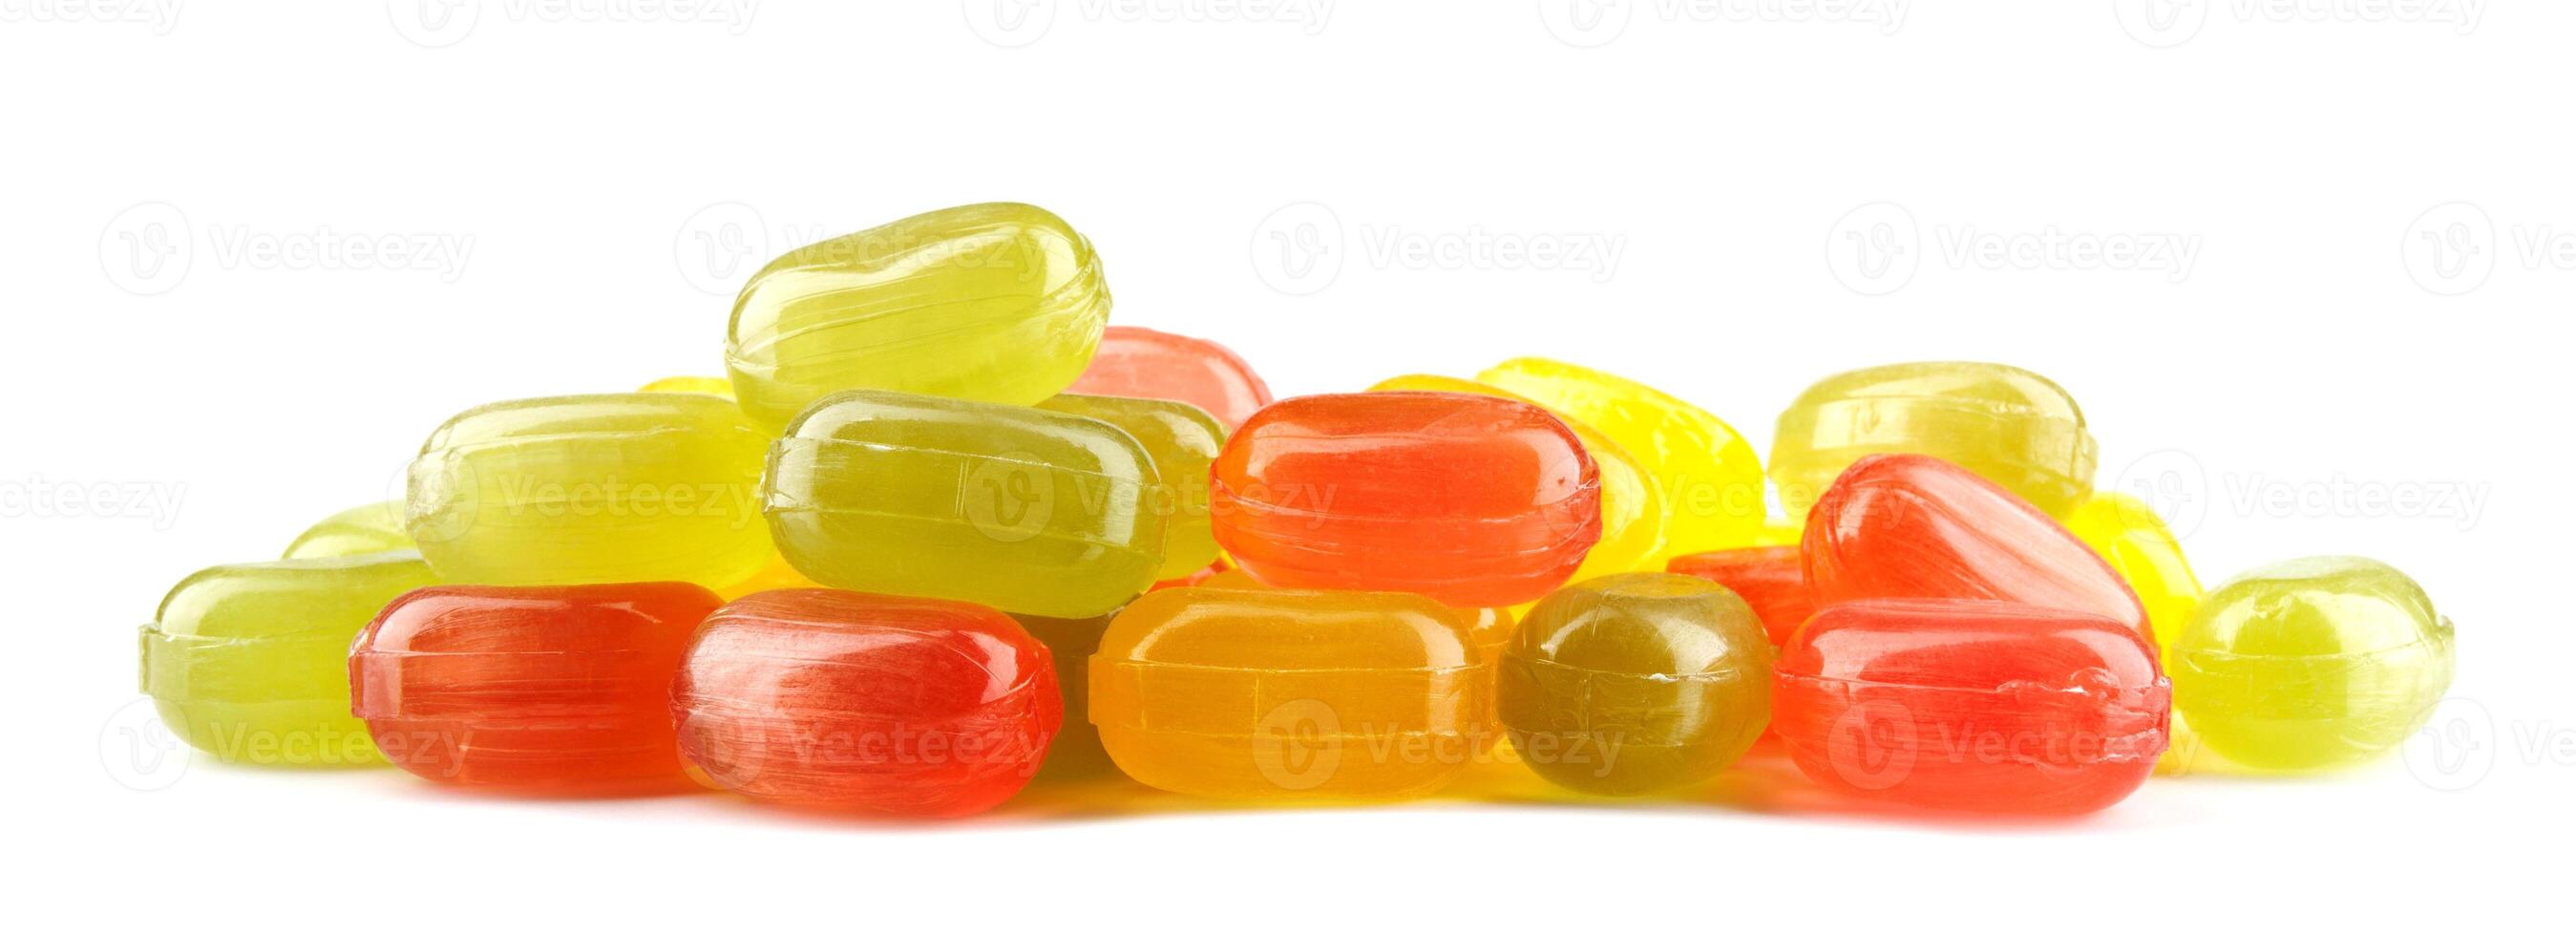 colorful fruit hard candy isolated on white. lollipop, candy, sweetmeat photo